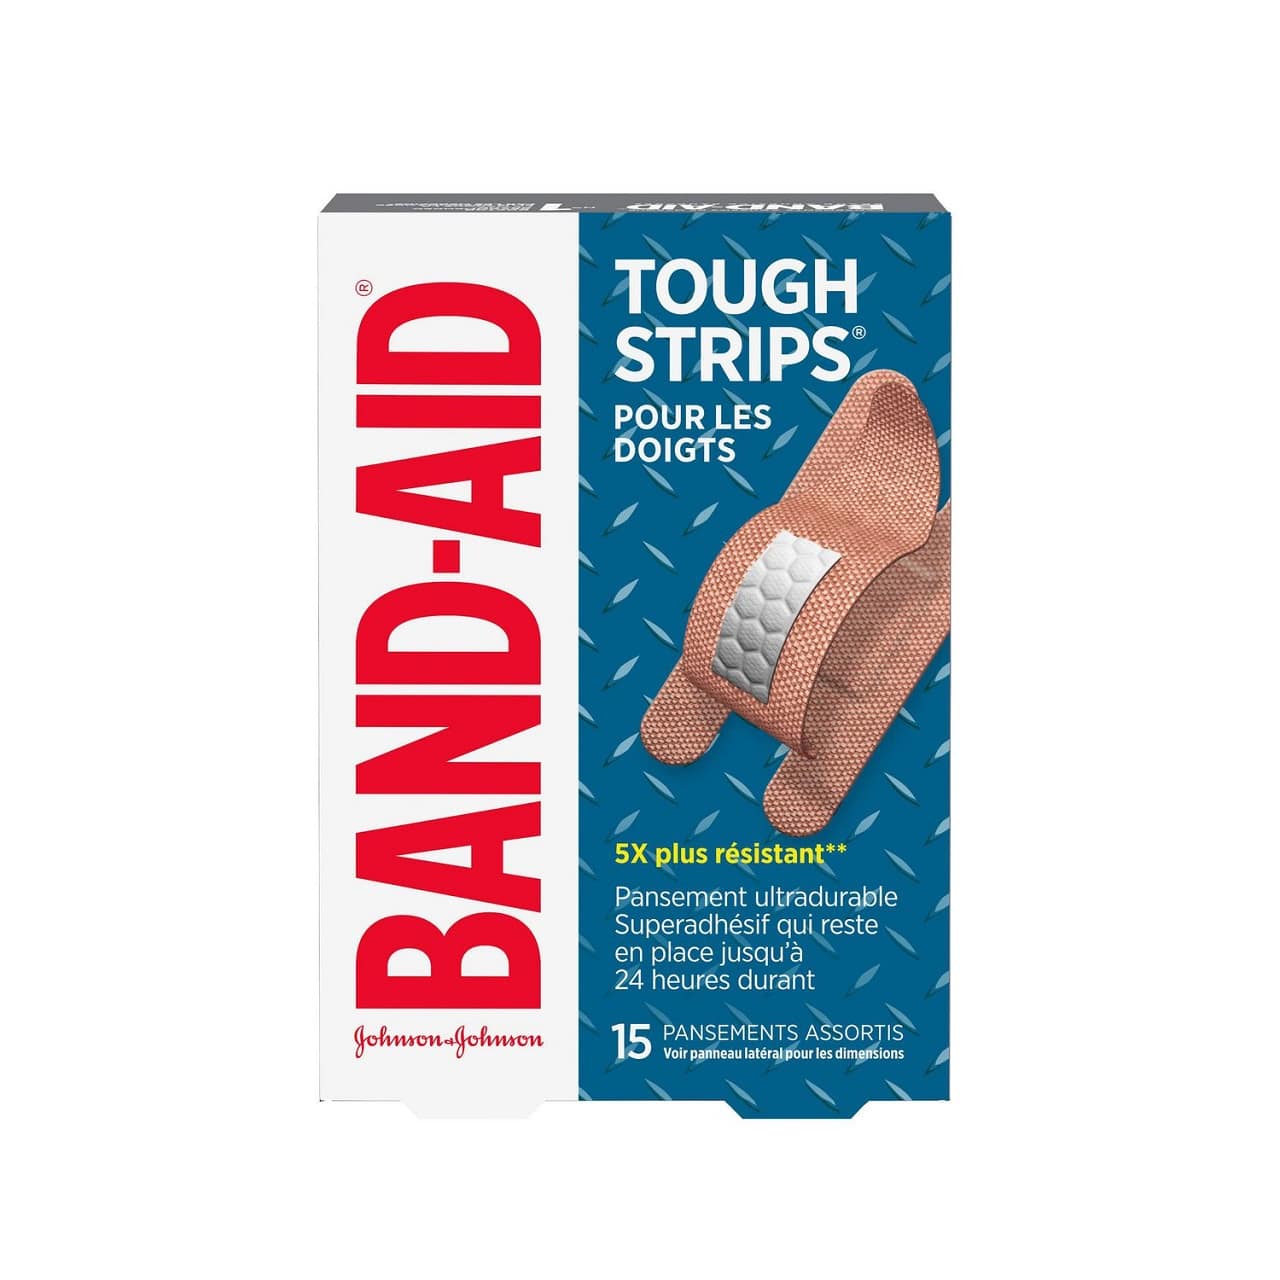 Product label for Band-Aid Tough Strips for Finger-Care (15 bandages) in French